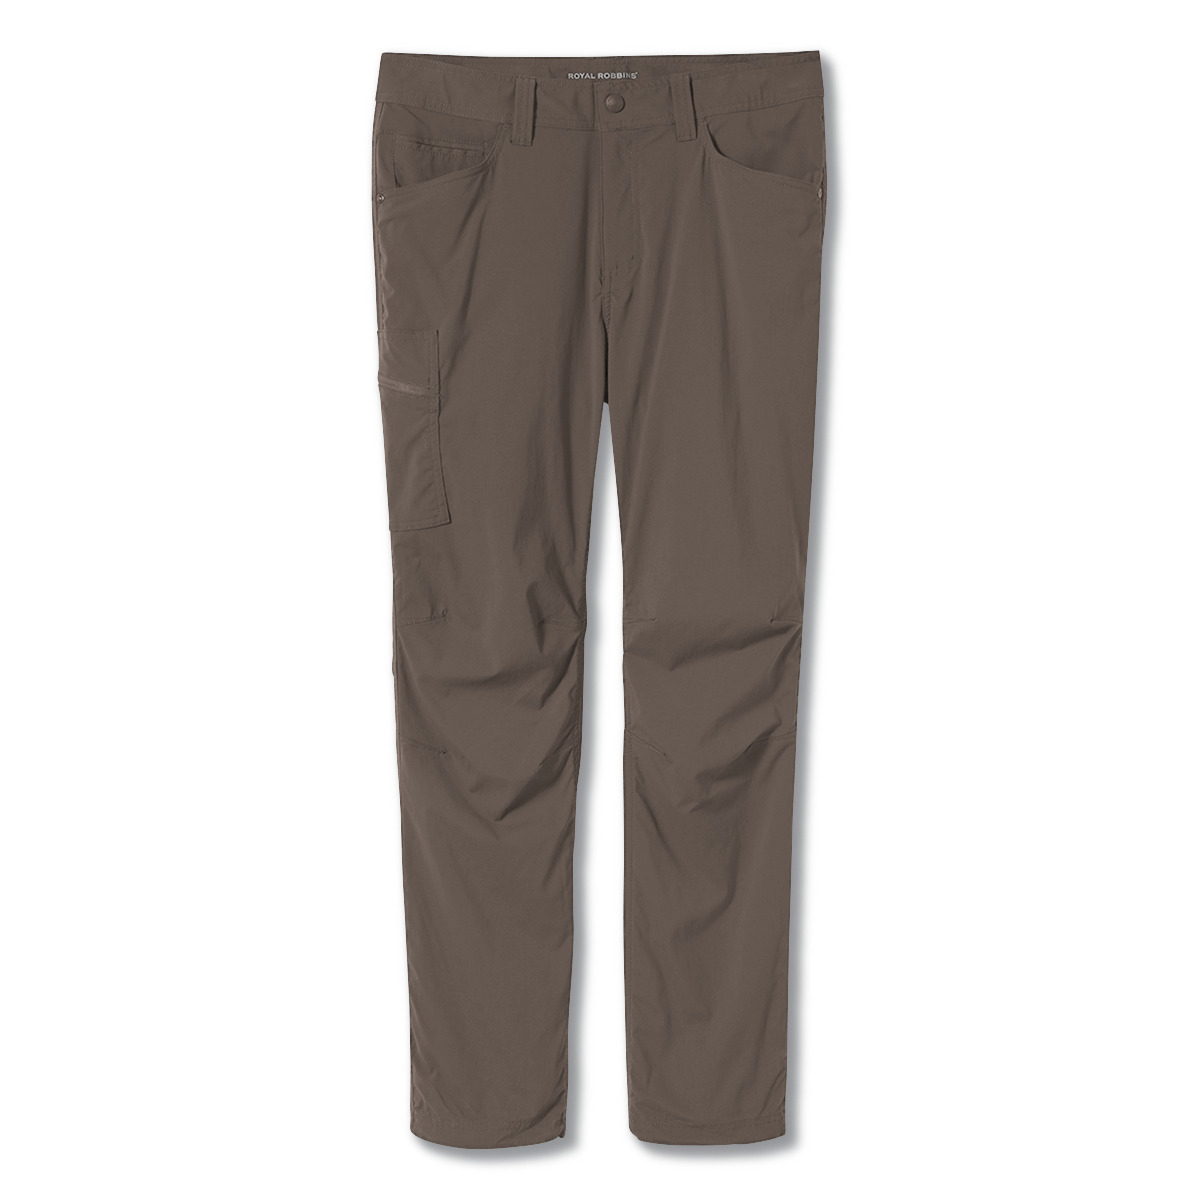 Aggregate more than 258 smart travel trousers